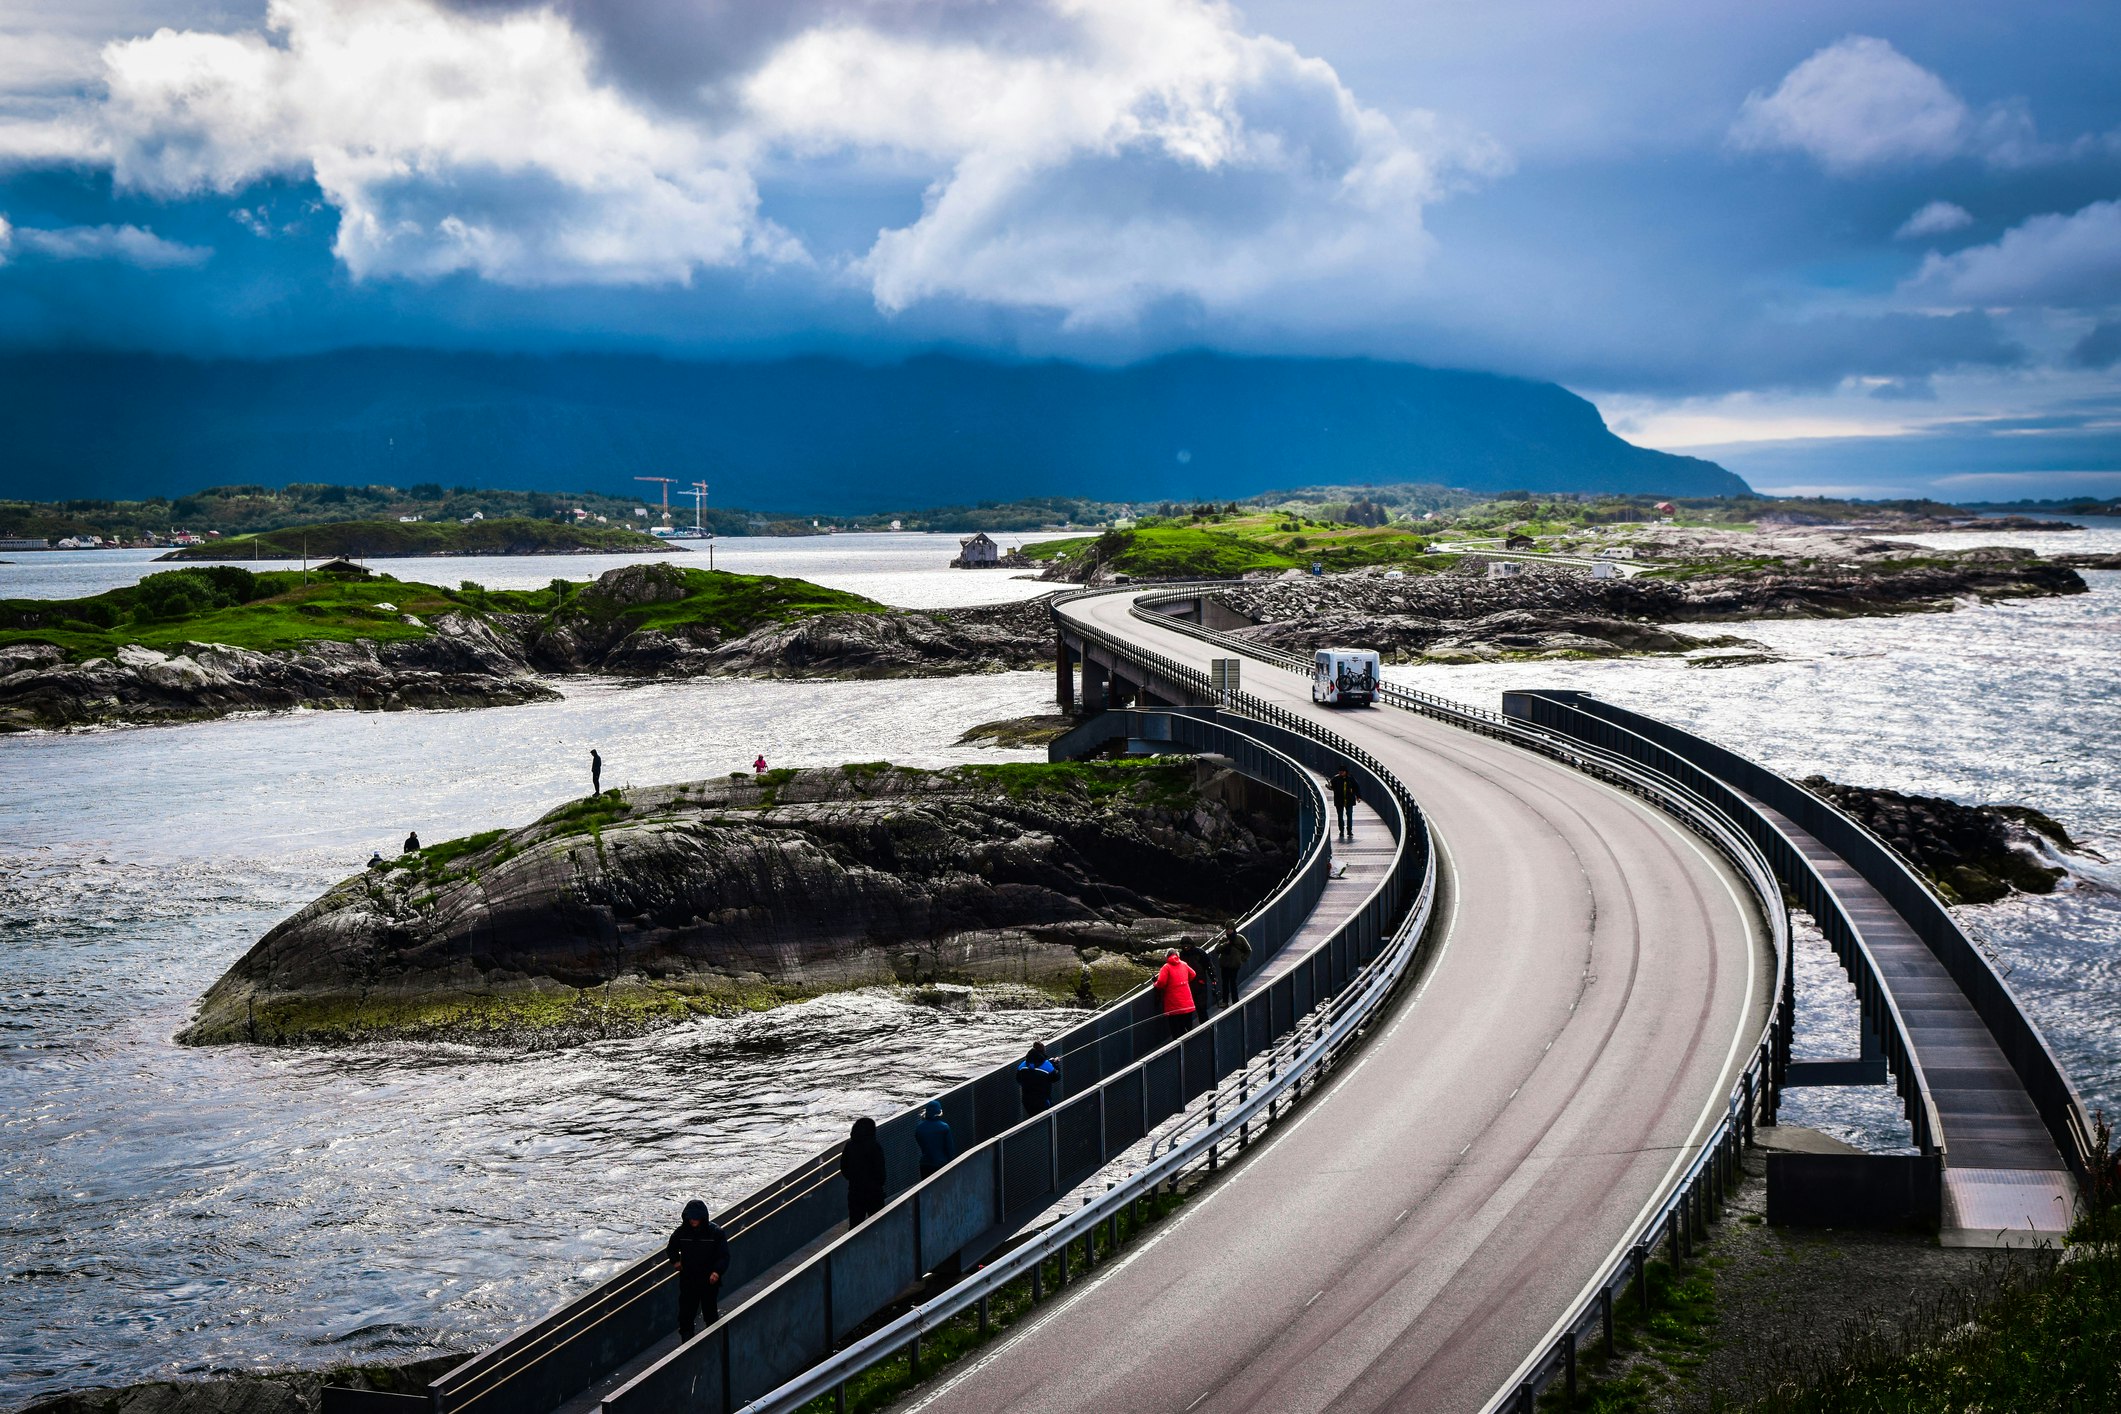 Cars on the Atlantic Road through small islands off the coast of Norway, Scandinavia, Europe